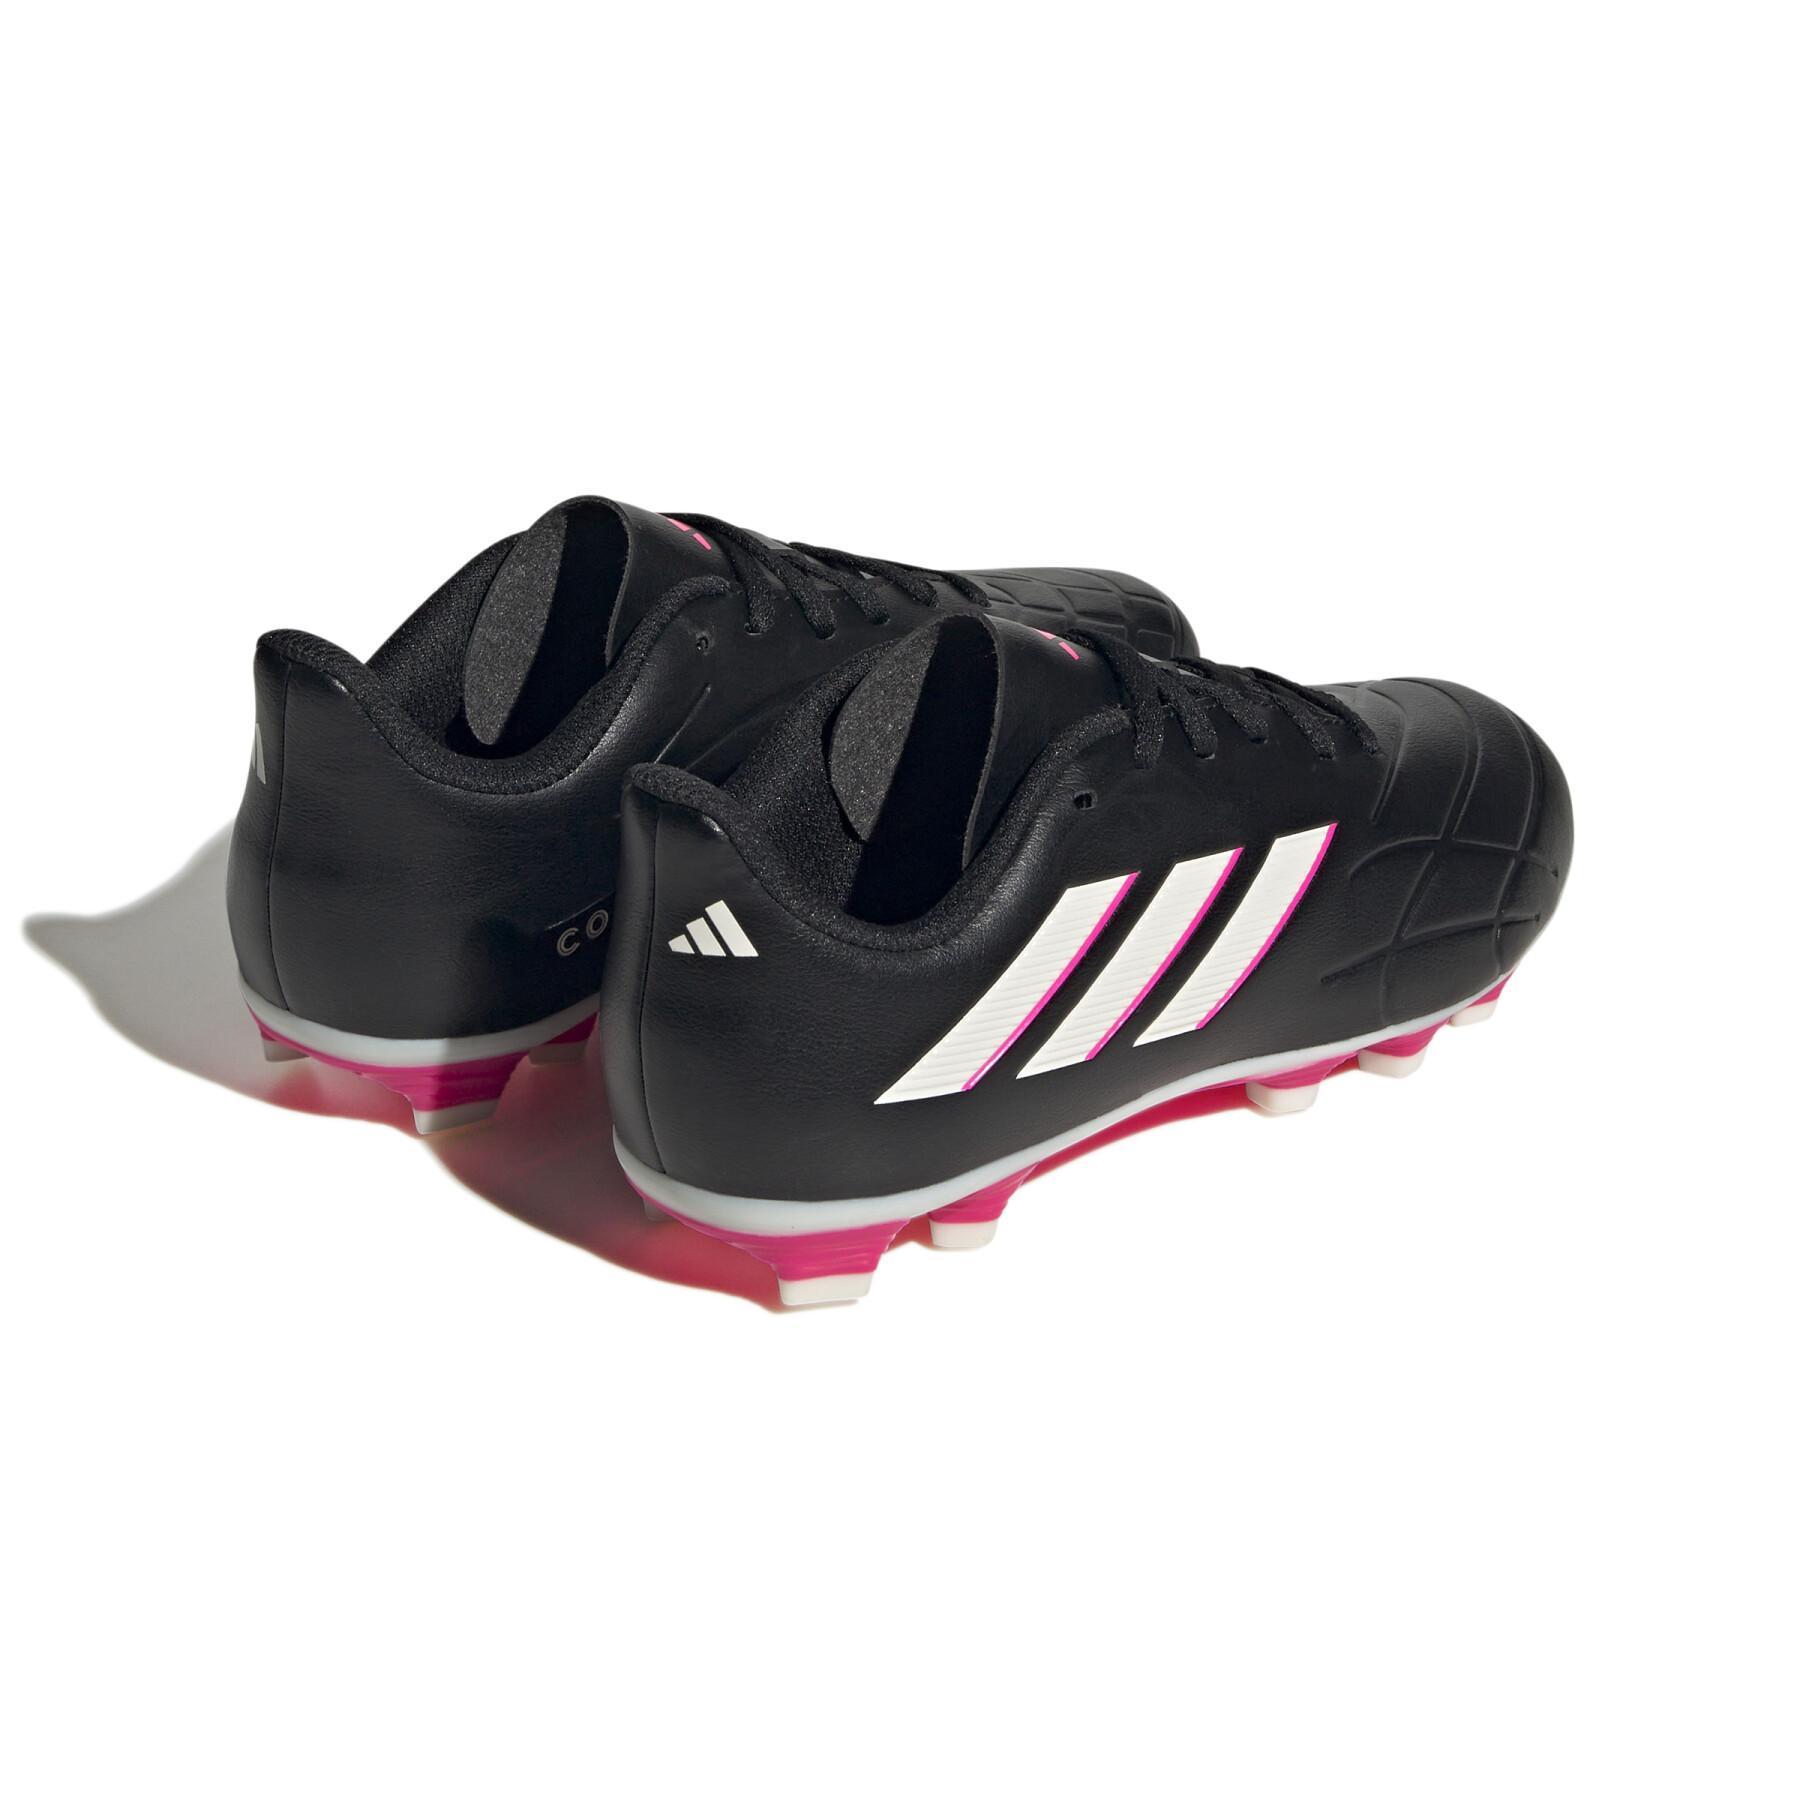 Children's soccer shoes adidas Copa Pure.4